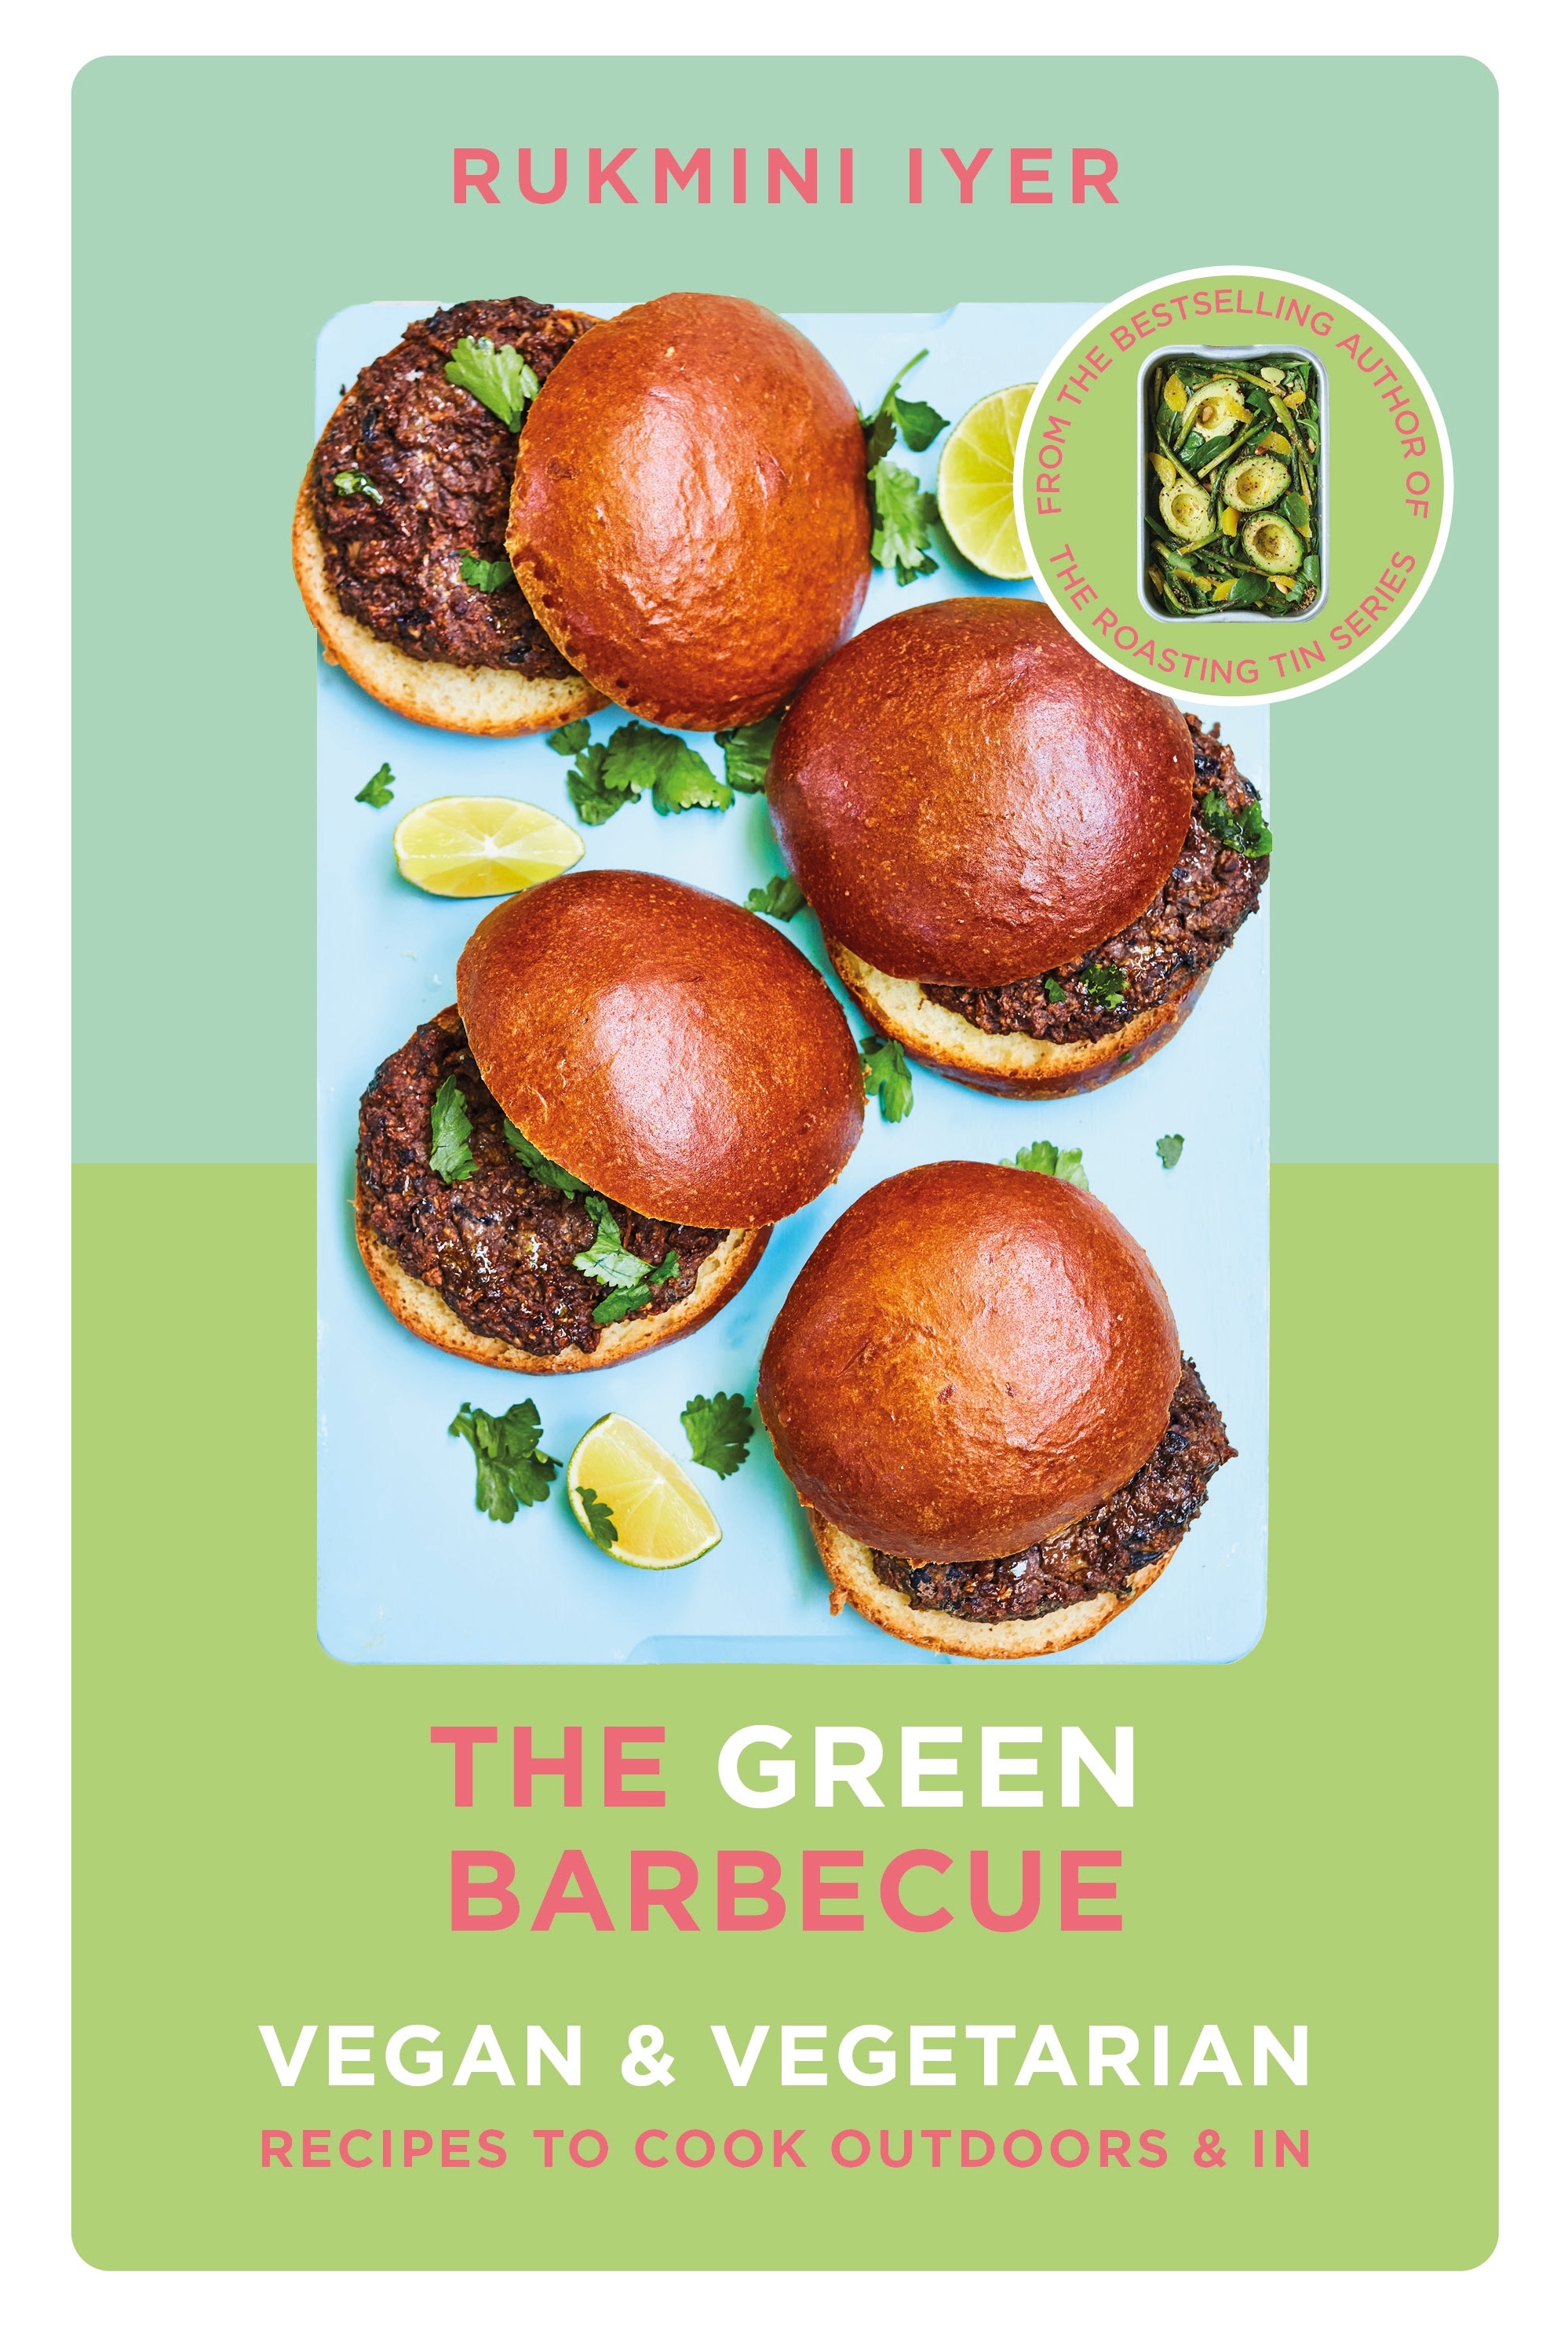 Book “The Green Barbecue” by Rukmini Iyer — April 29, 2021